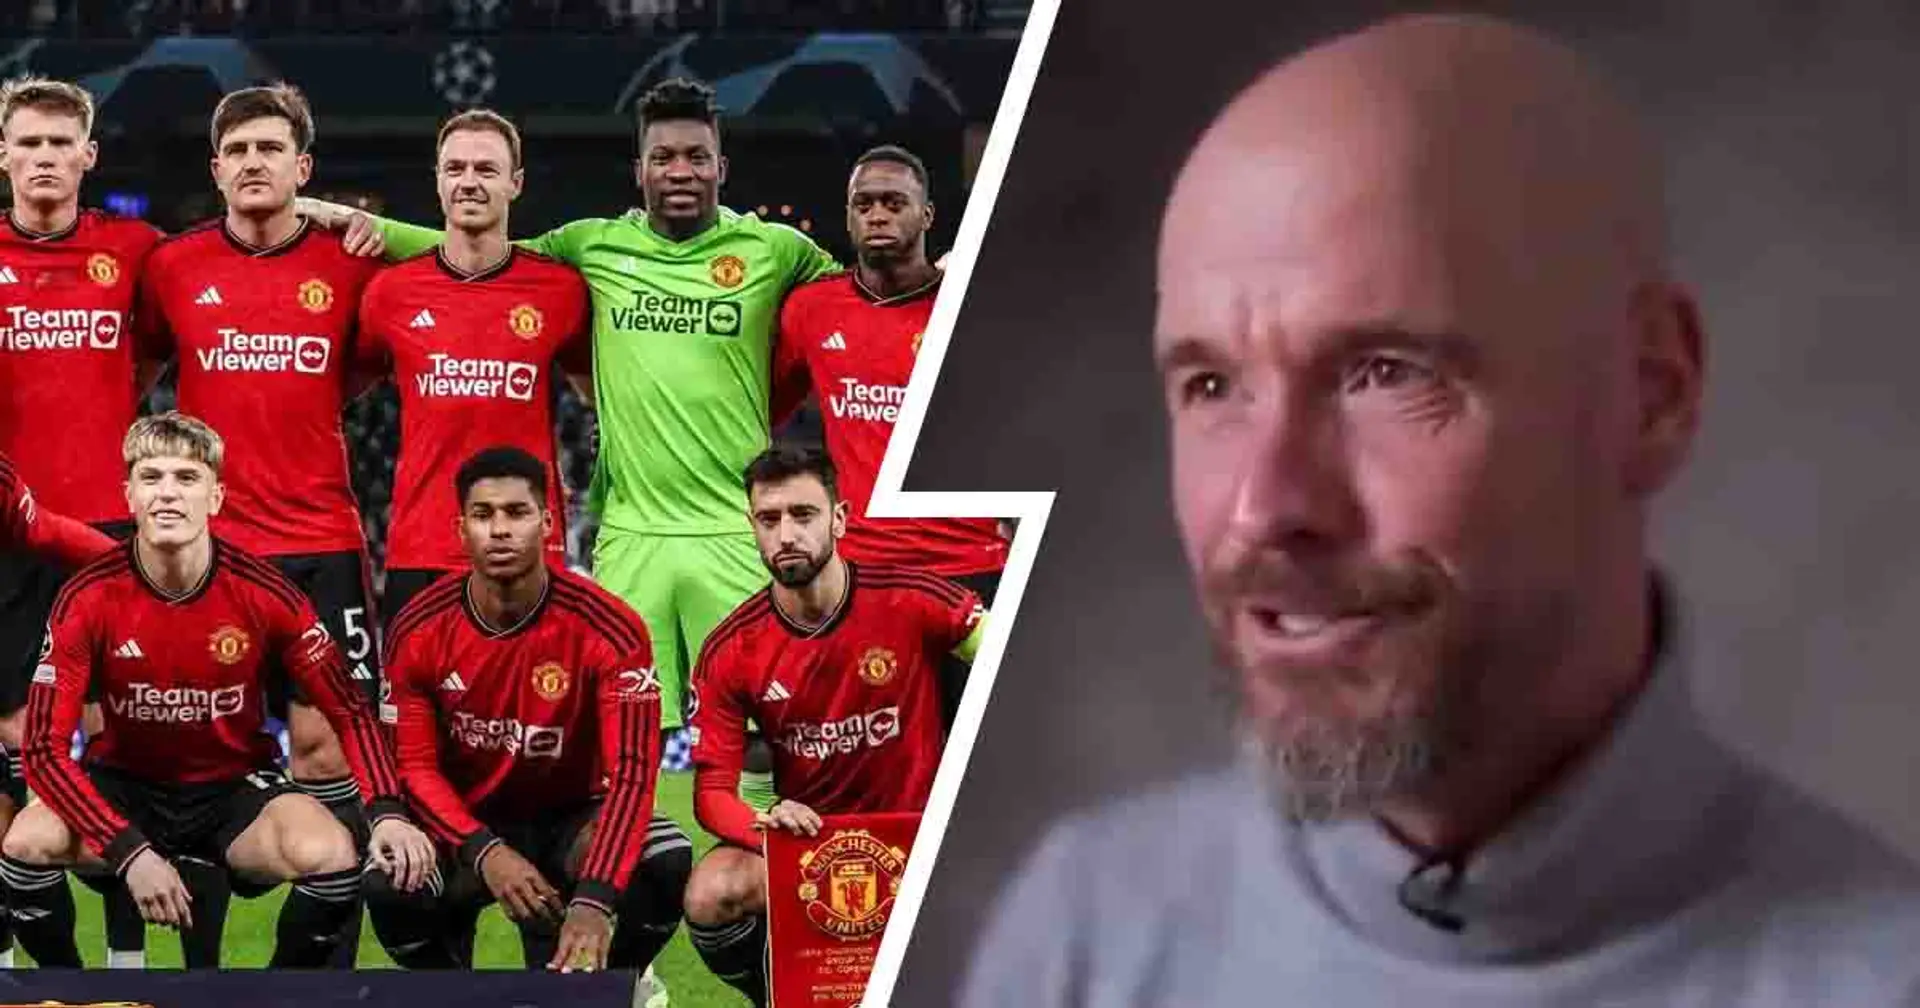 'You like it?': Ten Hag issues savage response to journalist who ‘likes to see’ crisis at Man United